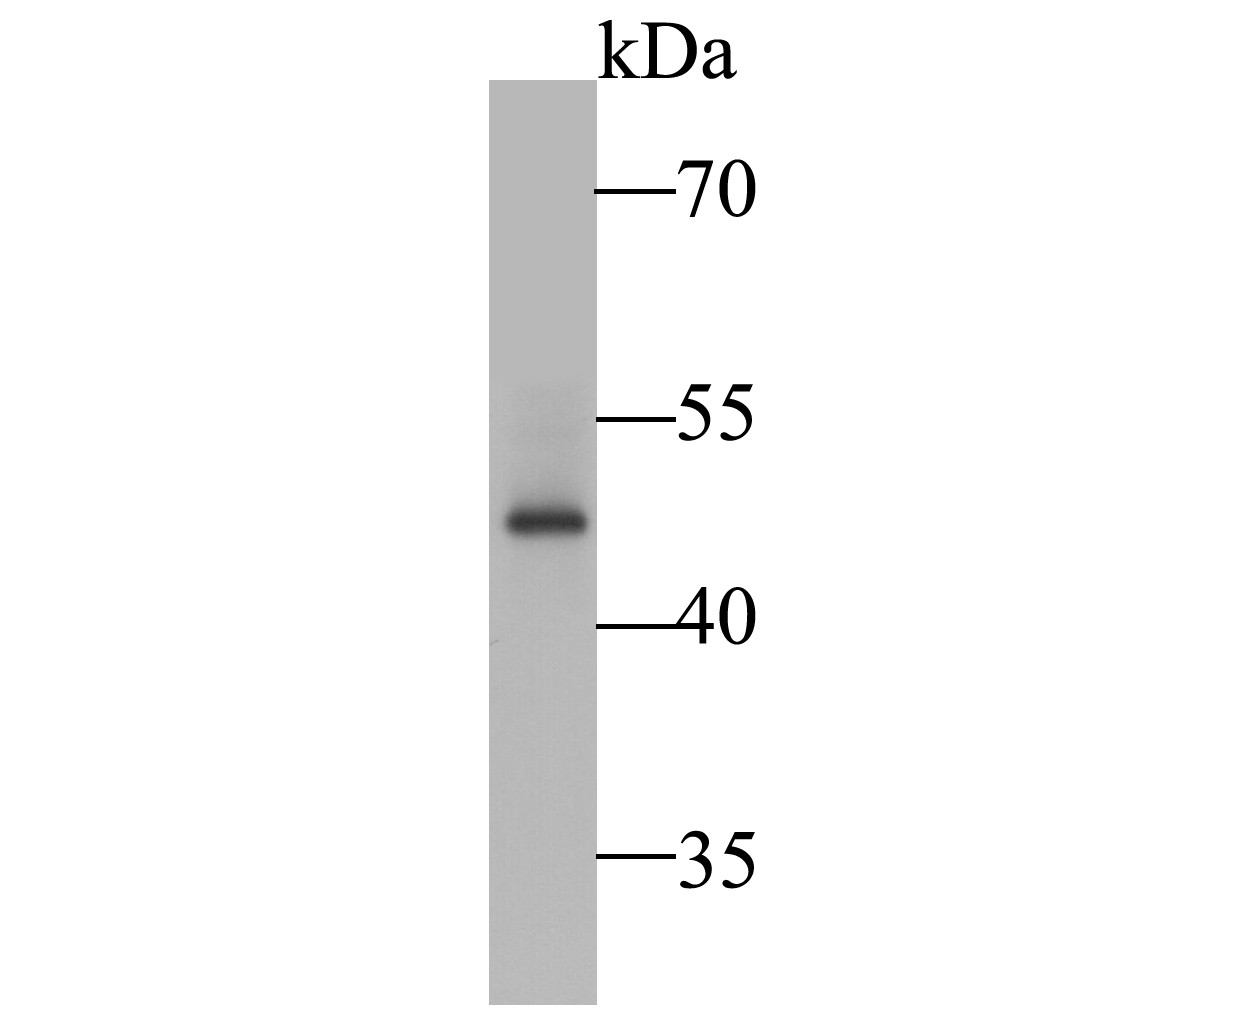 Western blot analysis of SSB on K562 cell lysate. Proteins were transferred to a PVDF membrane and blocked with 5% BSA in PBS for 1 hour at room temperature. The primary antibody (ER1901-16, 1/5,000) was used in 5% BSA at room temperature for 2 hours. Goat Anti-Rabbit IgG - HRP Secondary Antibody (HA1001) at 1:5,000 dilution was used for 1 hour at room temperature.